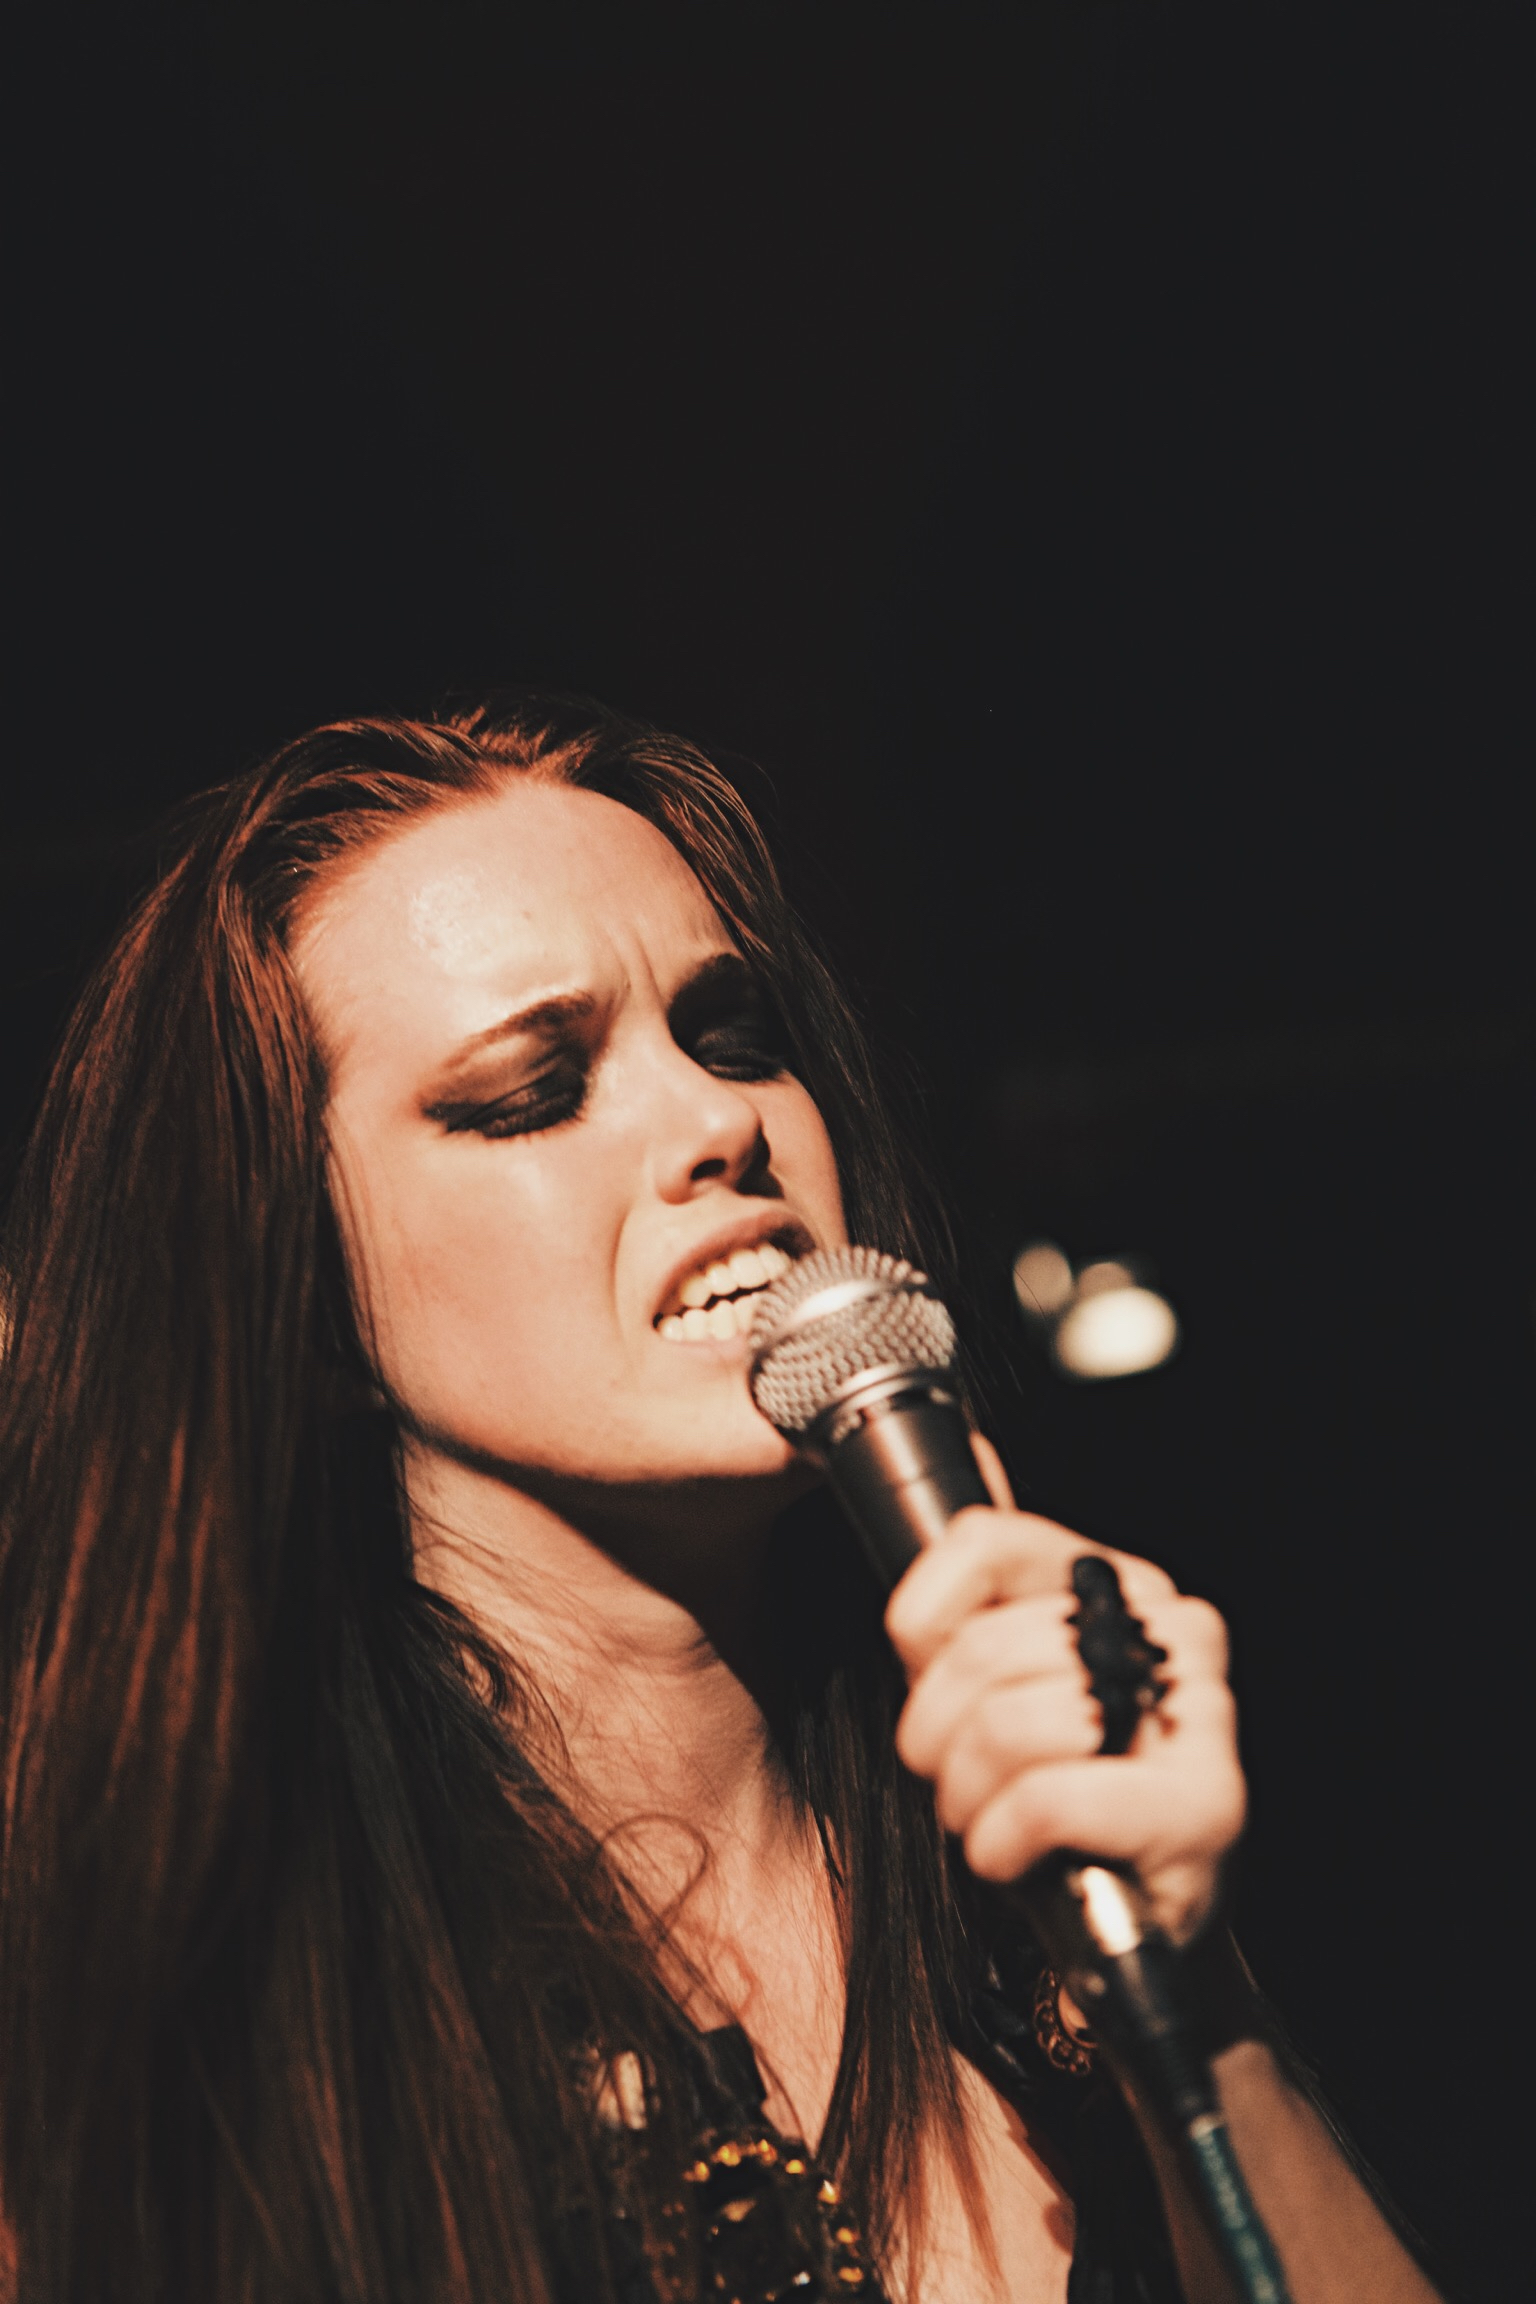 Girl with heavy eye makeup and long hair singing into a microphone.